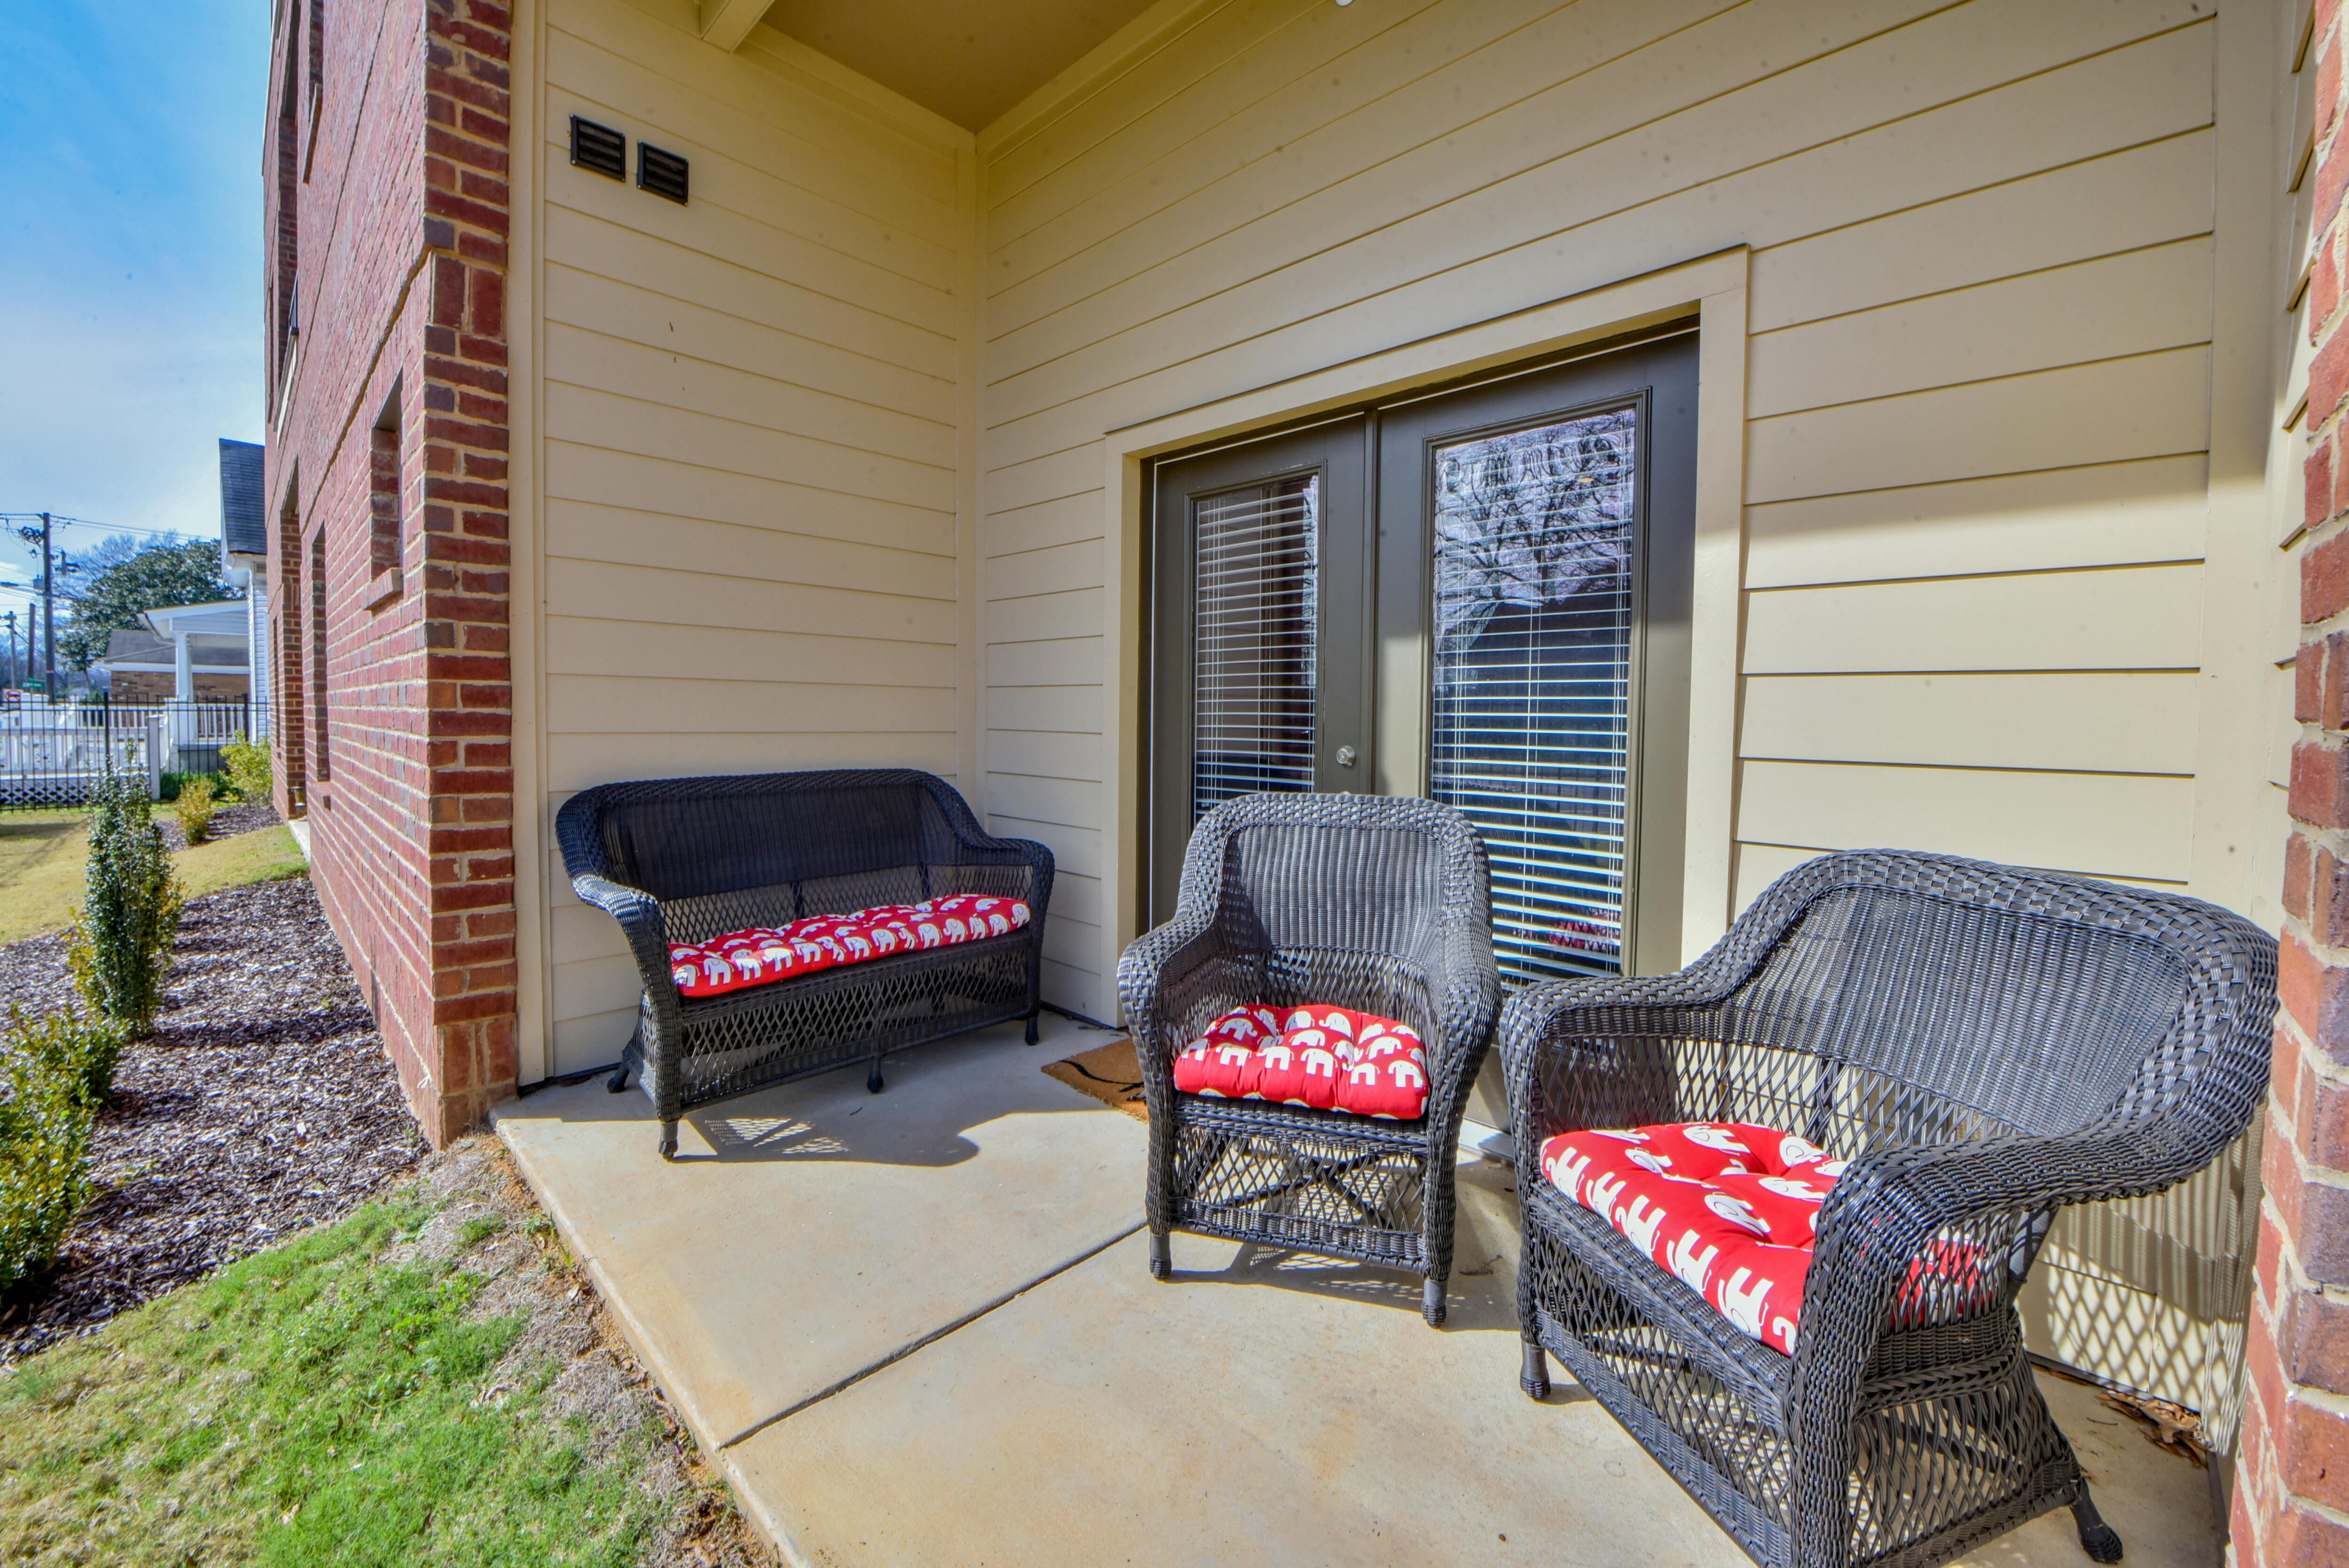 There is outdoor seating on the back patio where you can enjoy the Alabama weather.